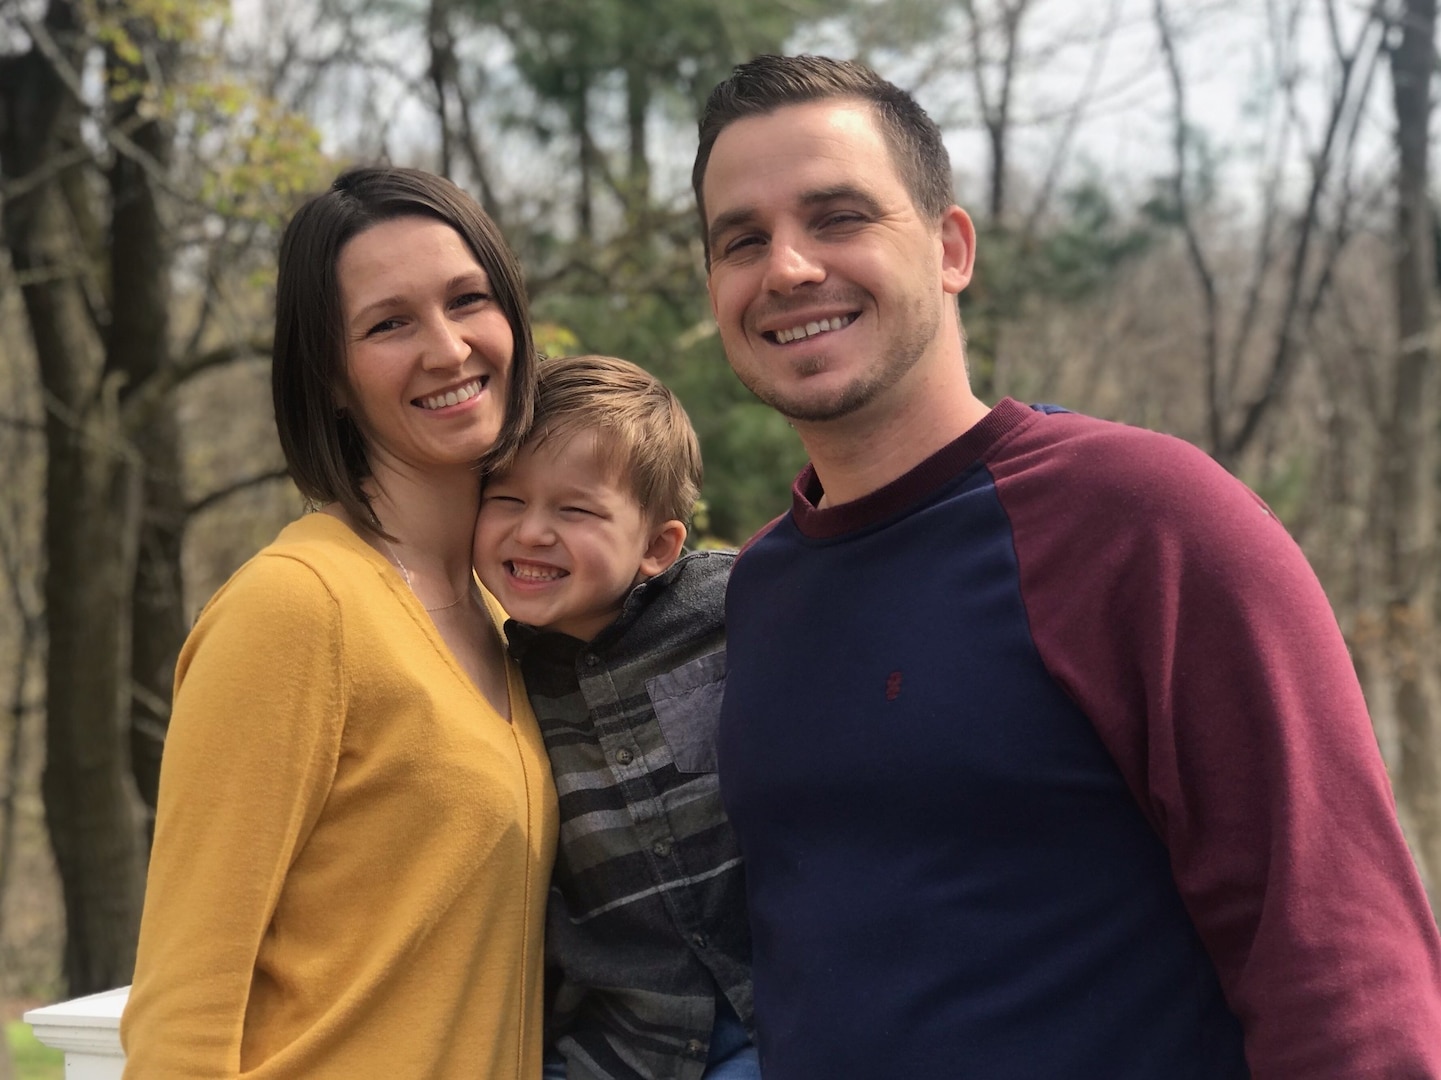 Sorina Prian-Tanczos, a DLA Troop Support Industrial Hardware employee, poses in front of a wooded area with her husband and son April 17, 2020.